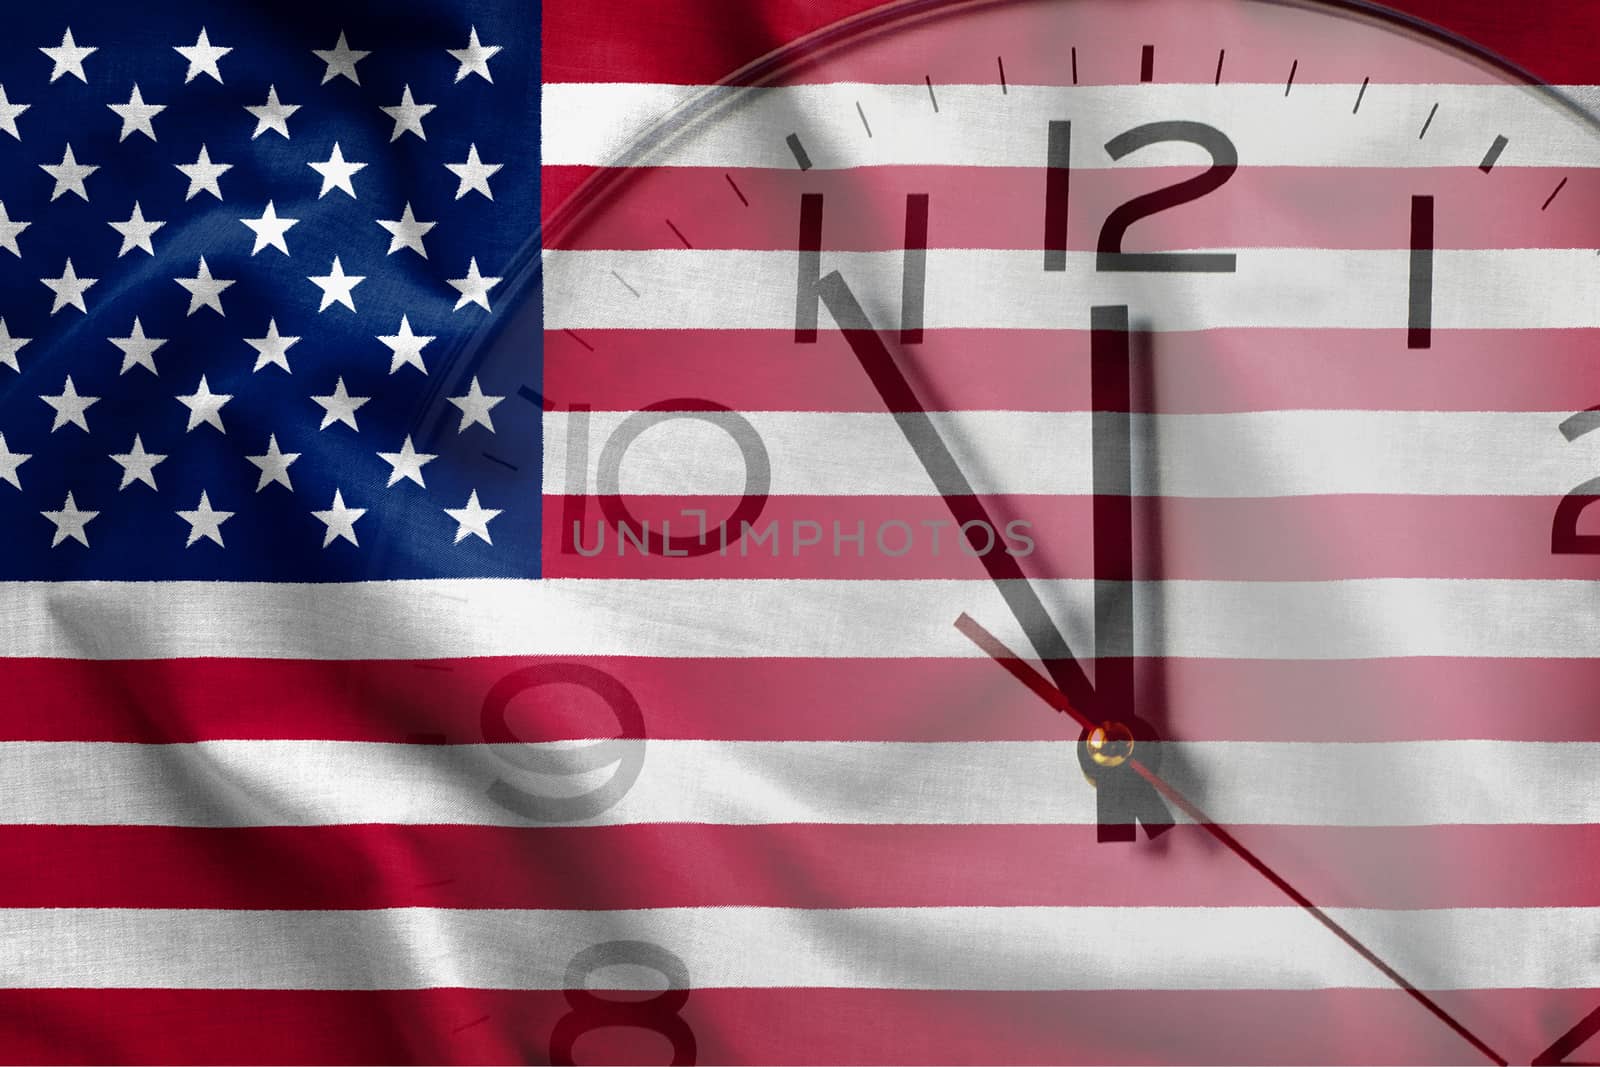 Double exposure of USA flag and clock-face showing time